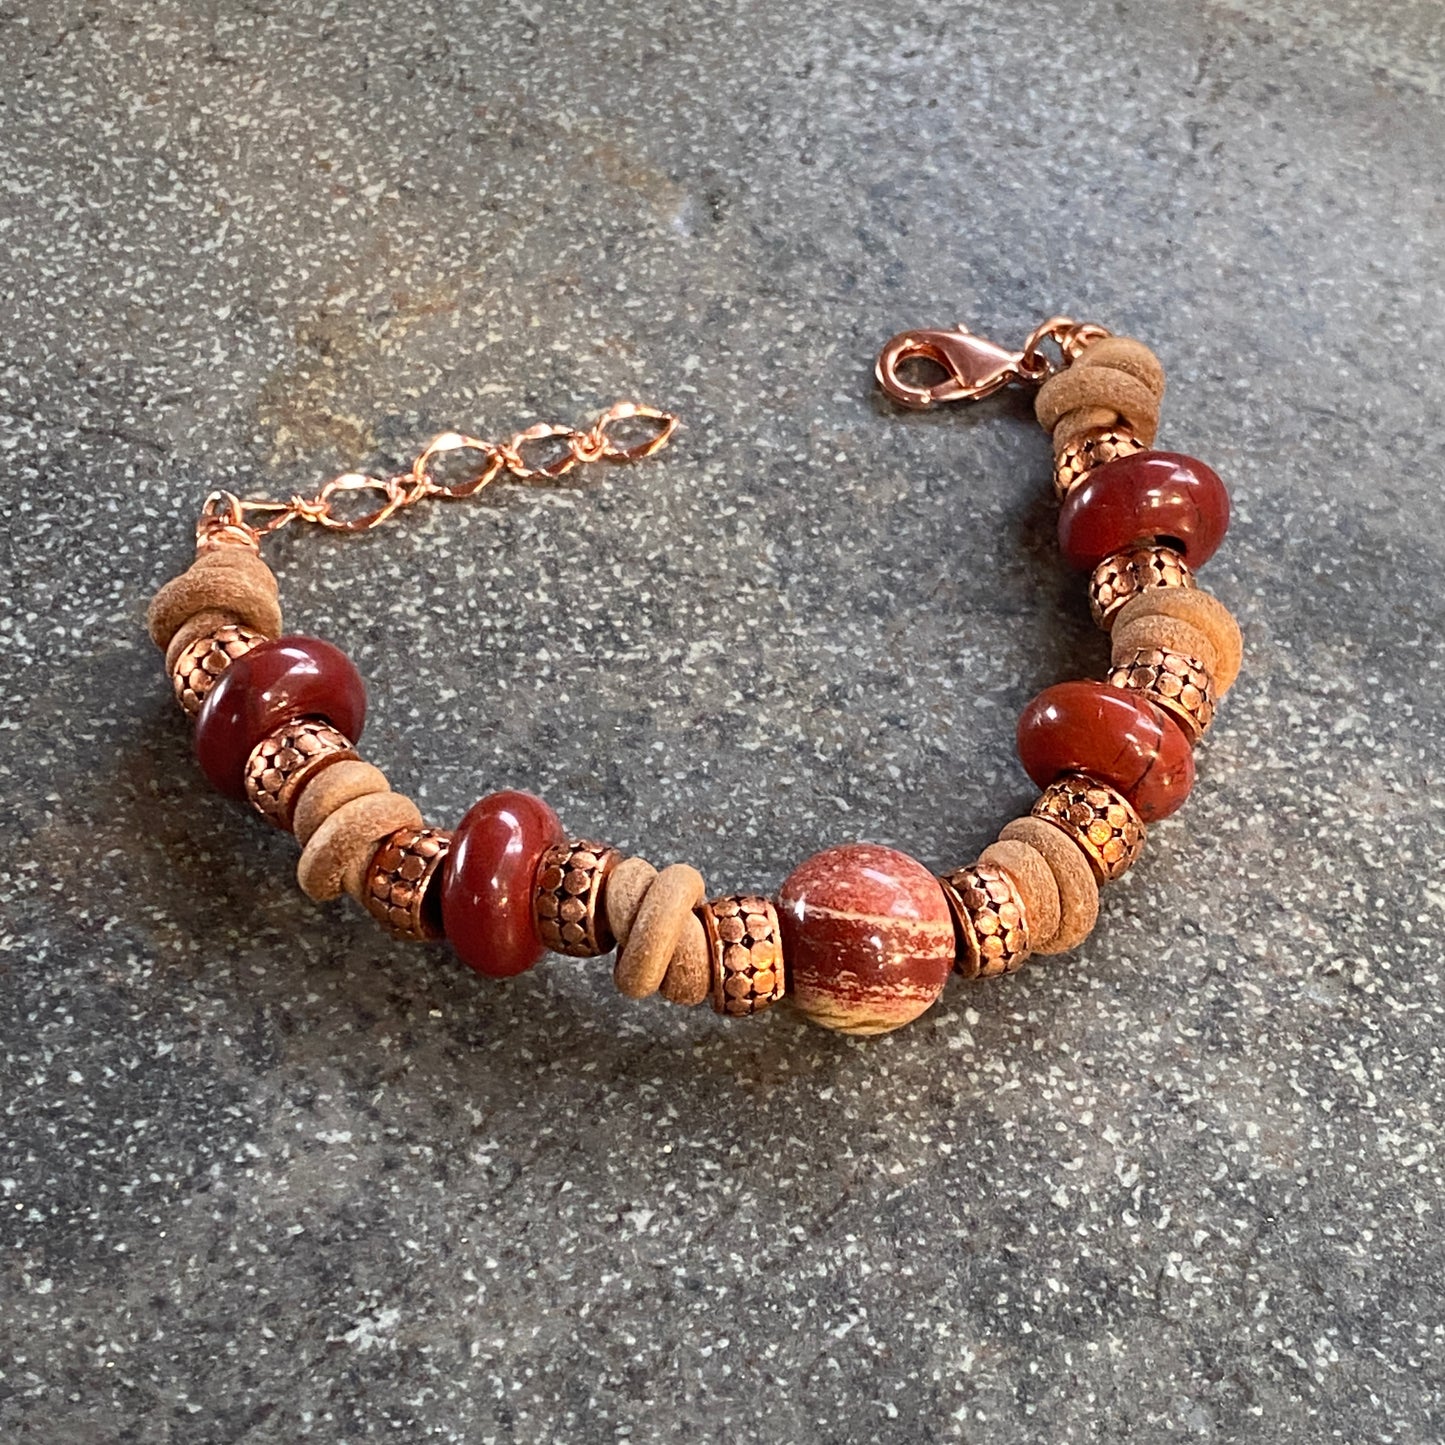 BoHo Bali Gemstone and Leather with copper Clasp Bracelets